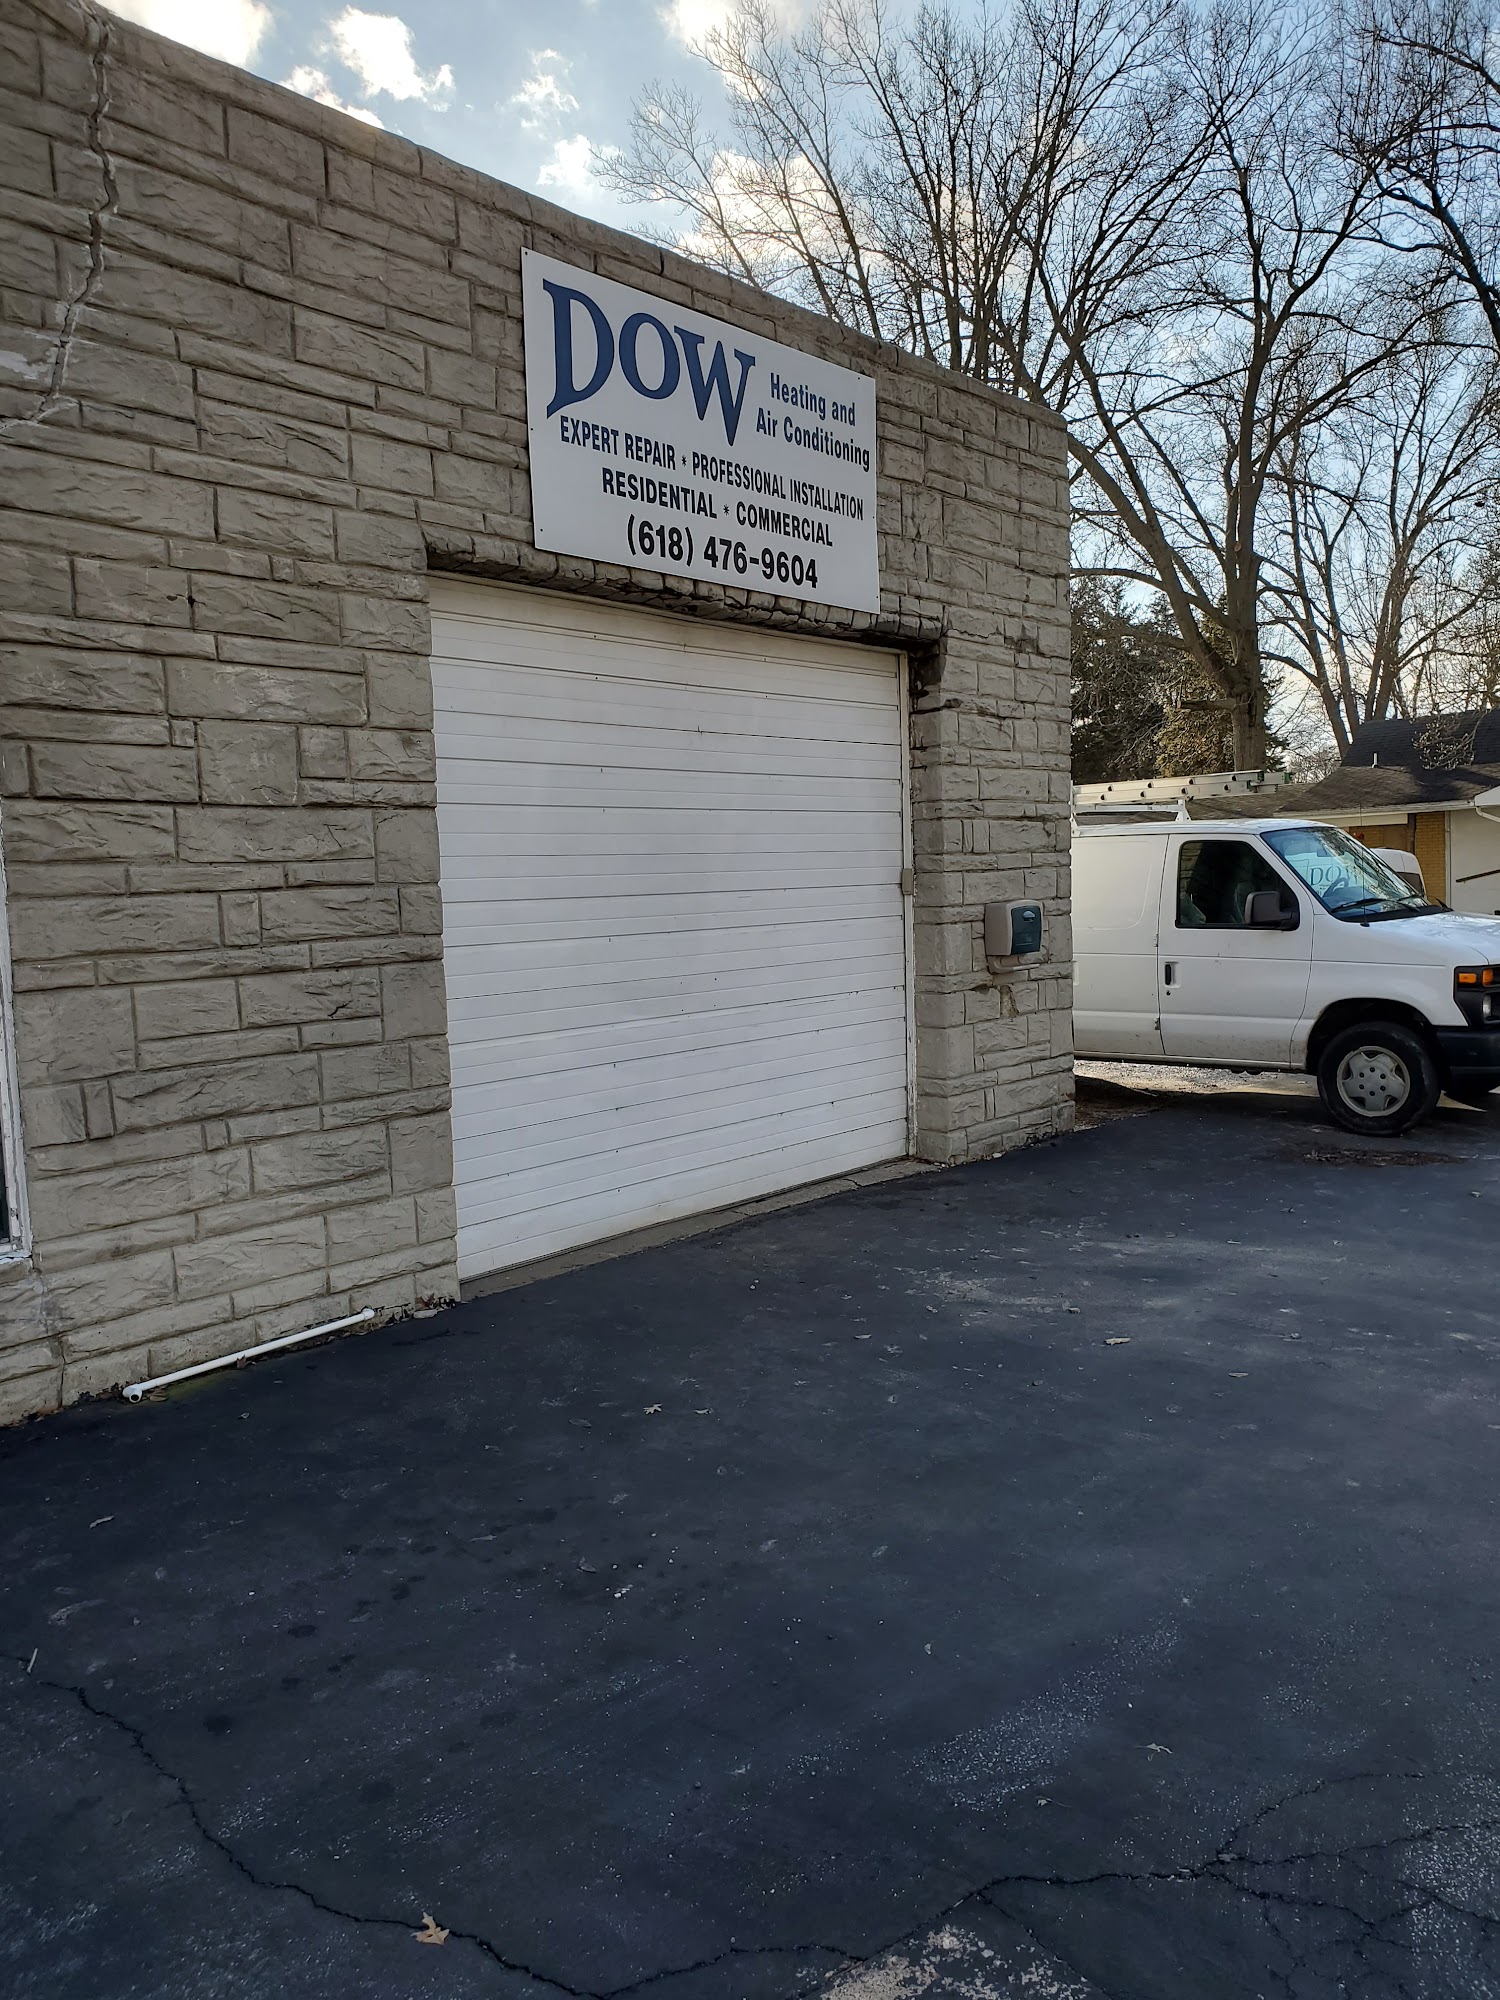 DOW Heating & Air Conditioning